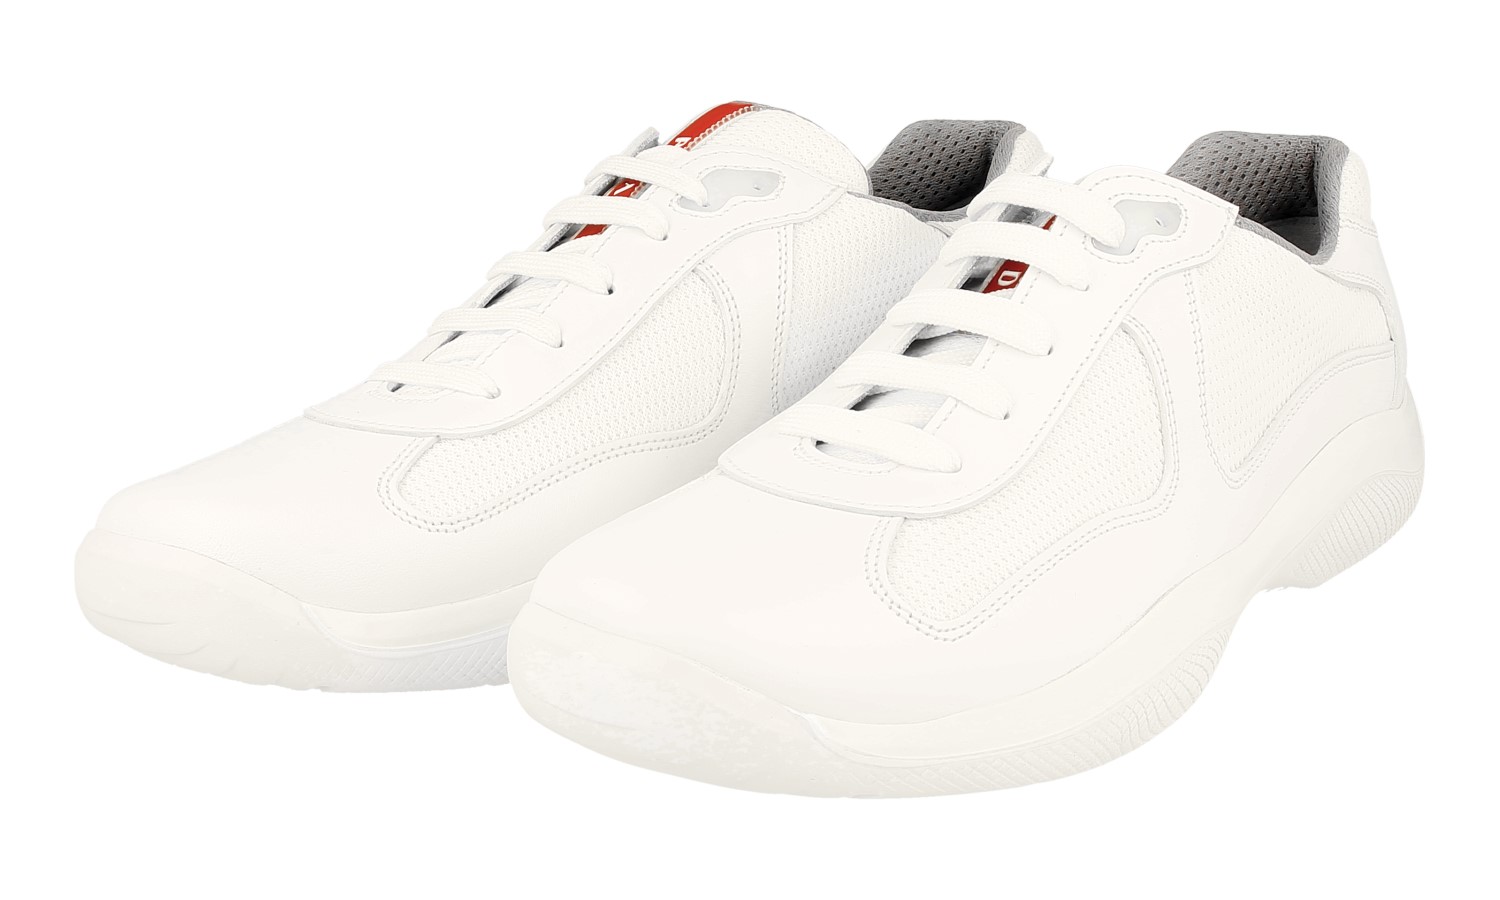 LUXURY PRADA AMERICAS CUP SNEAKERS SHOES PS0906 WHITE NEW US 10 EU 43